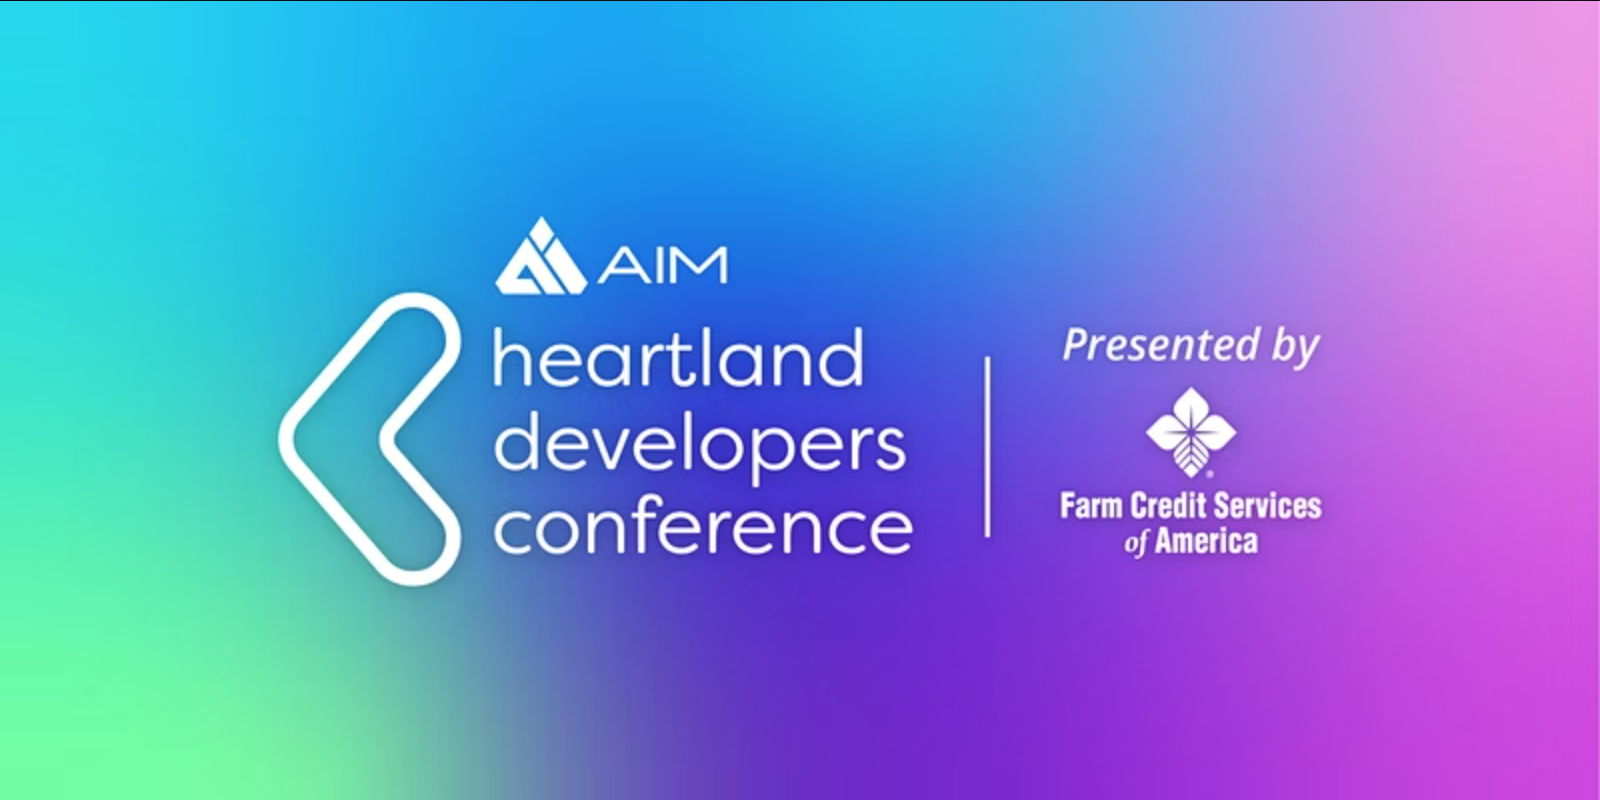 AIM Heartland Developers Conference 2022 promotional image